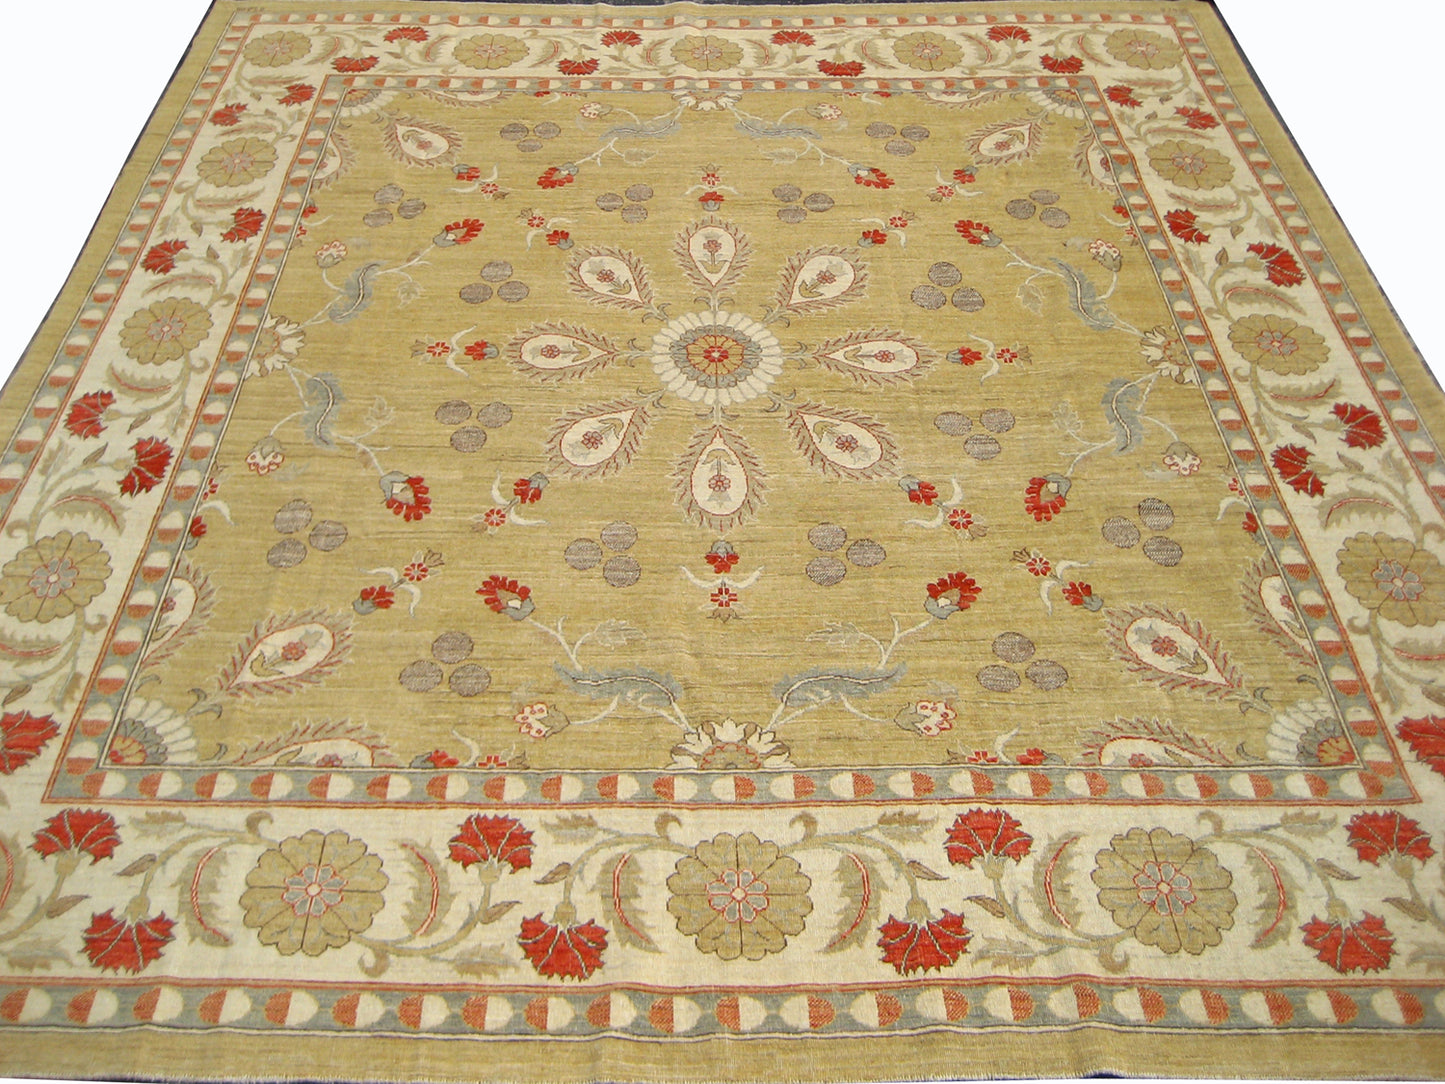 9'x9' Square Floral Ariana Traditional Rug